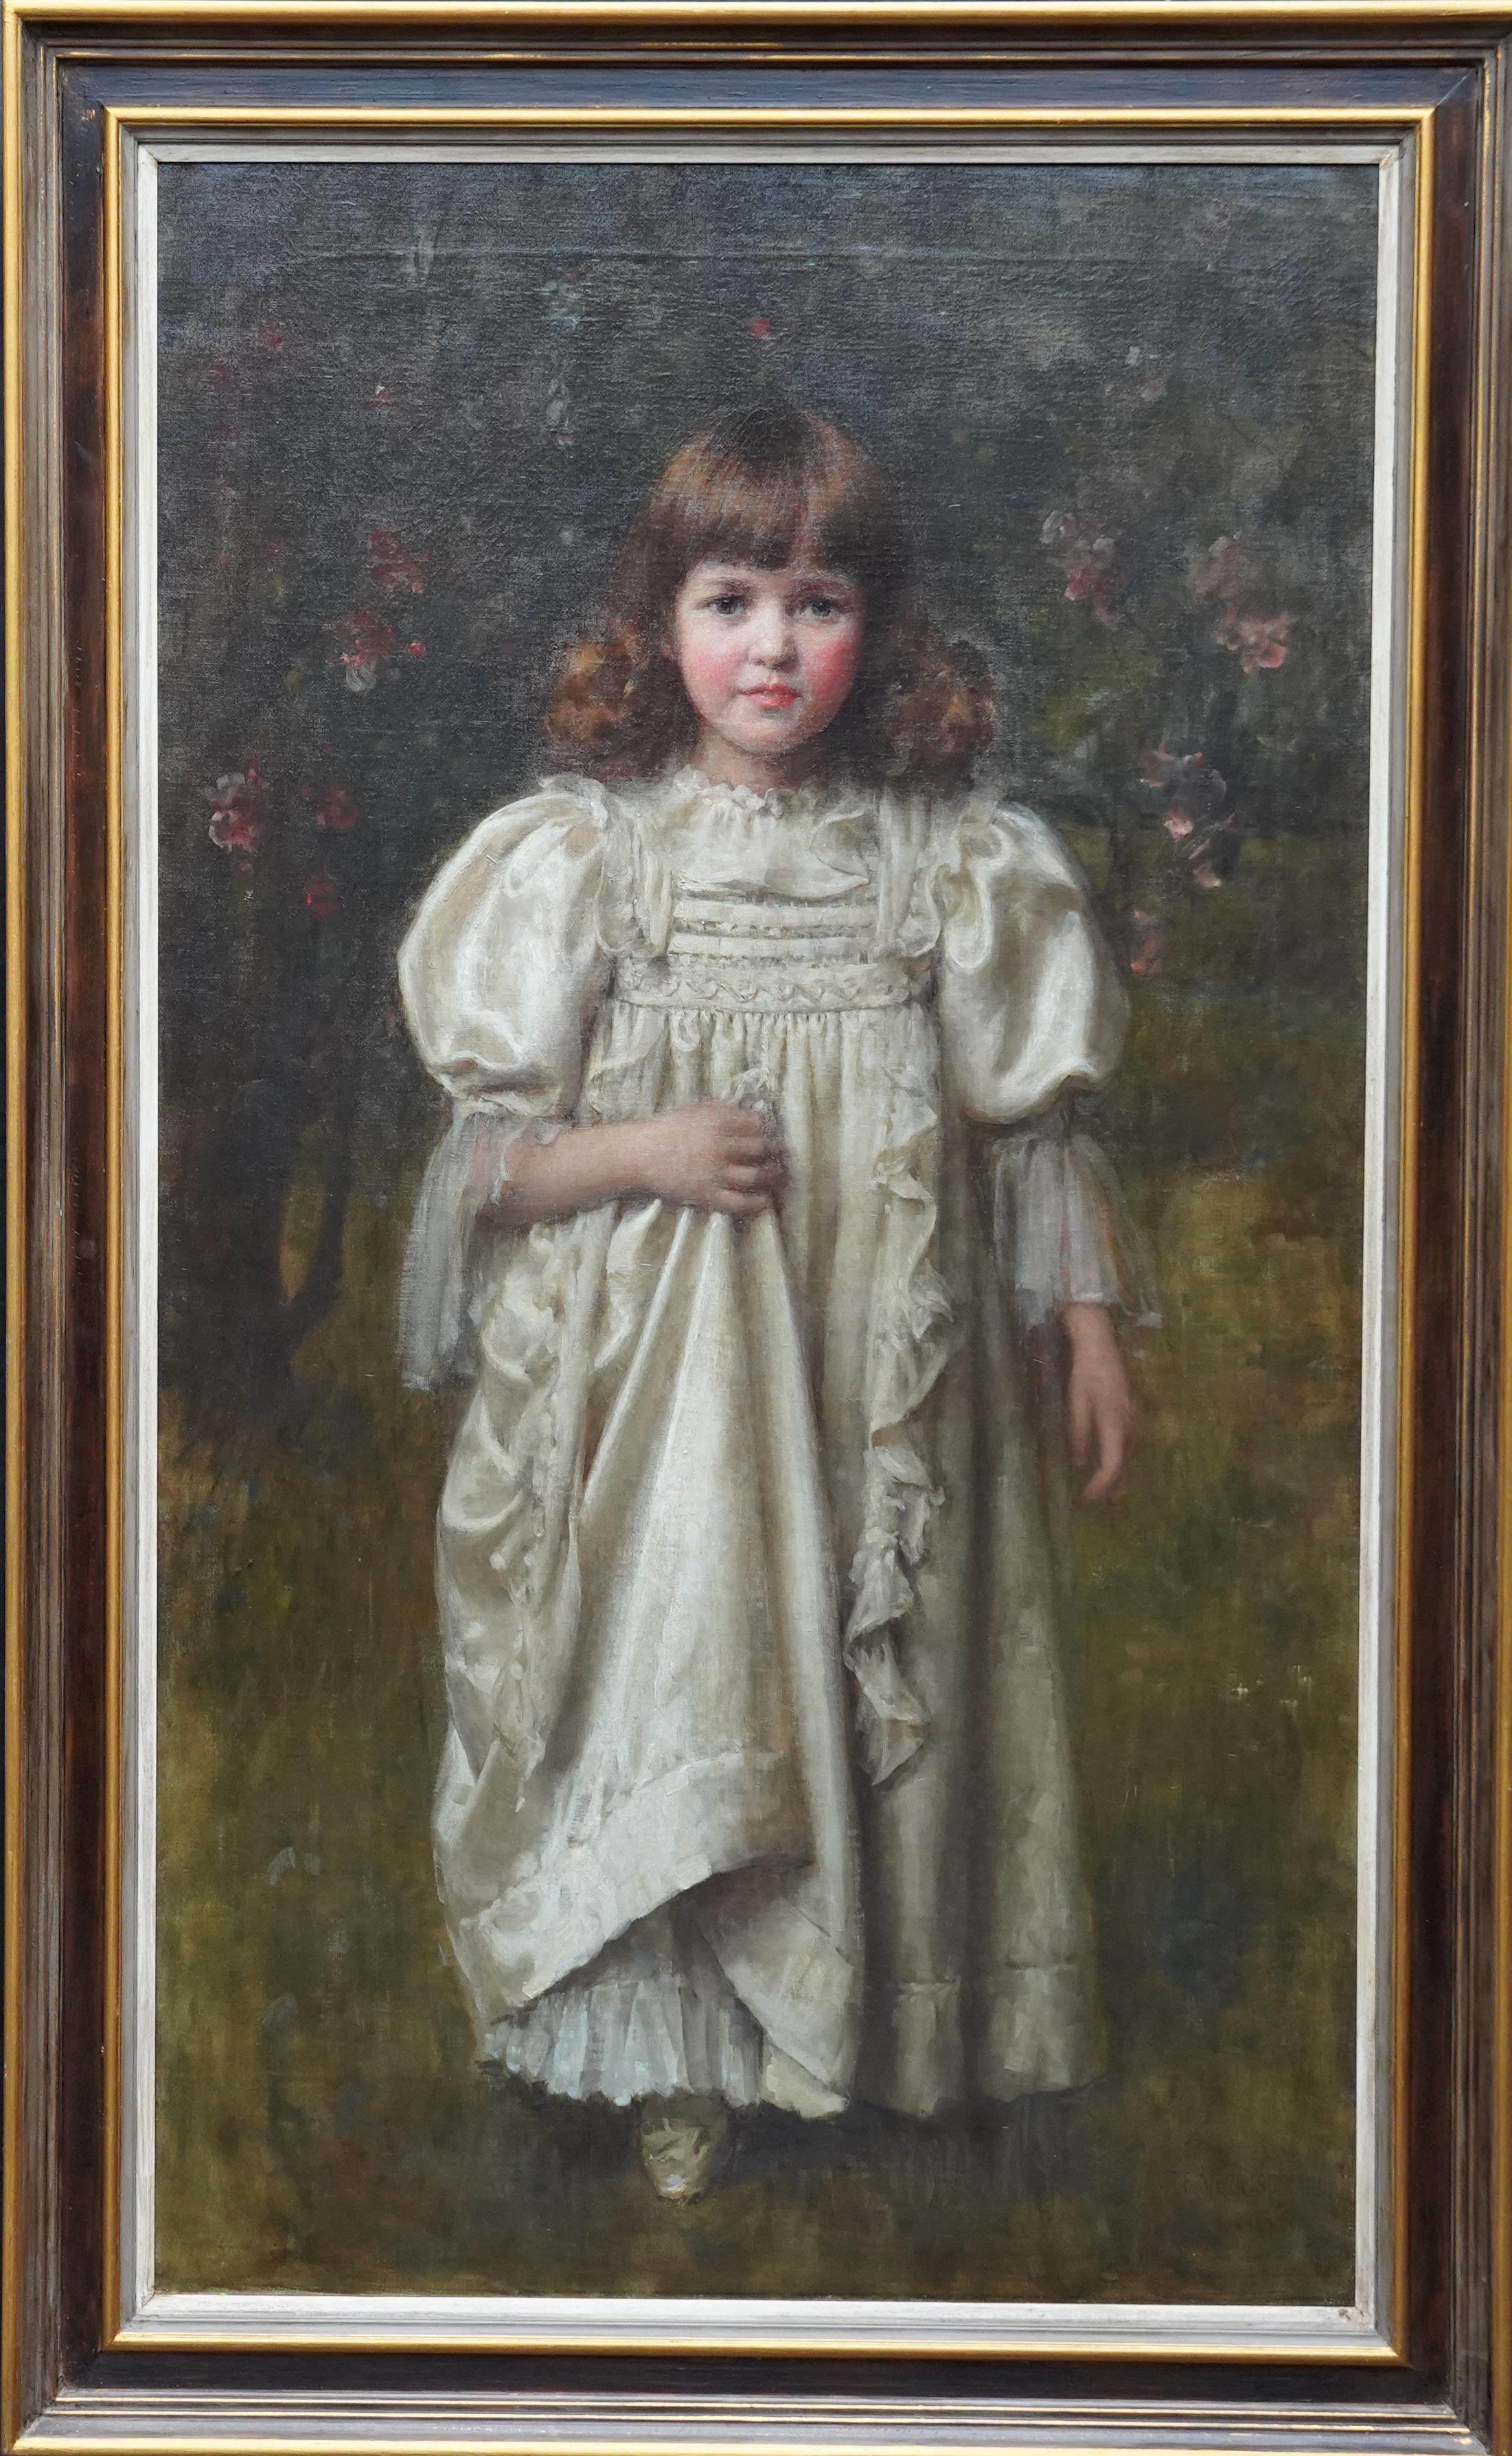 Robert Edward Morrison Portrait Painting - Portrait of a Young Girl in a White Dress - British Edwardian art oil painting